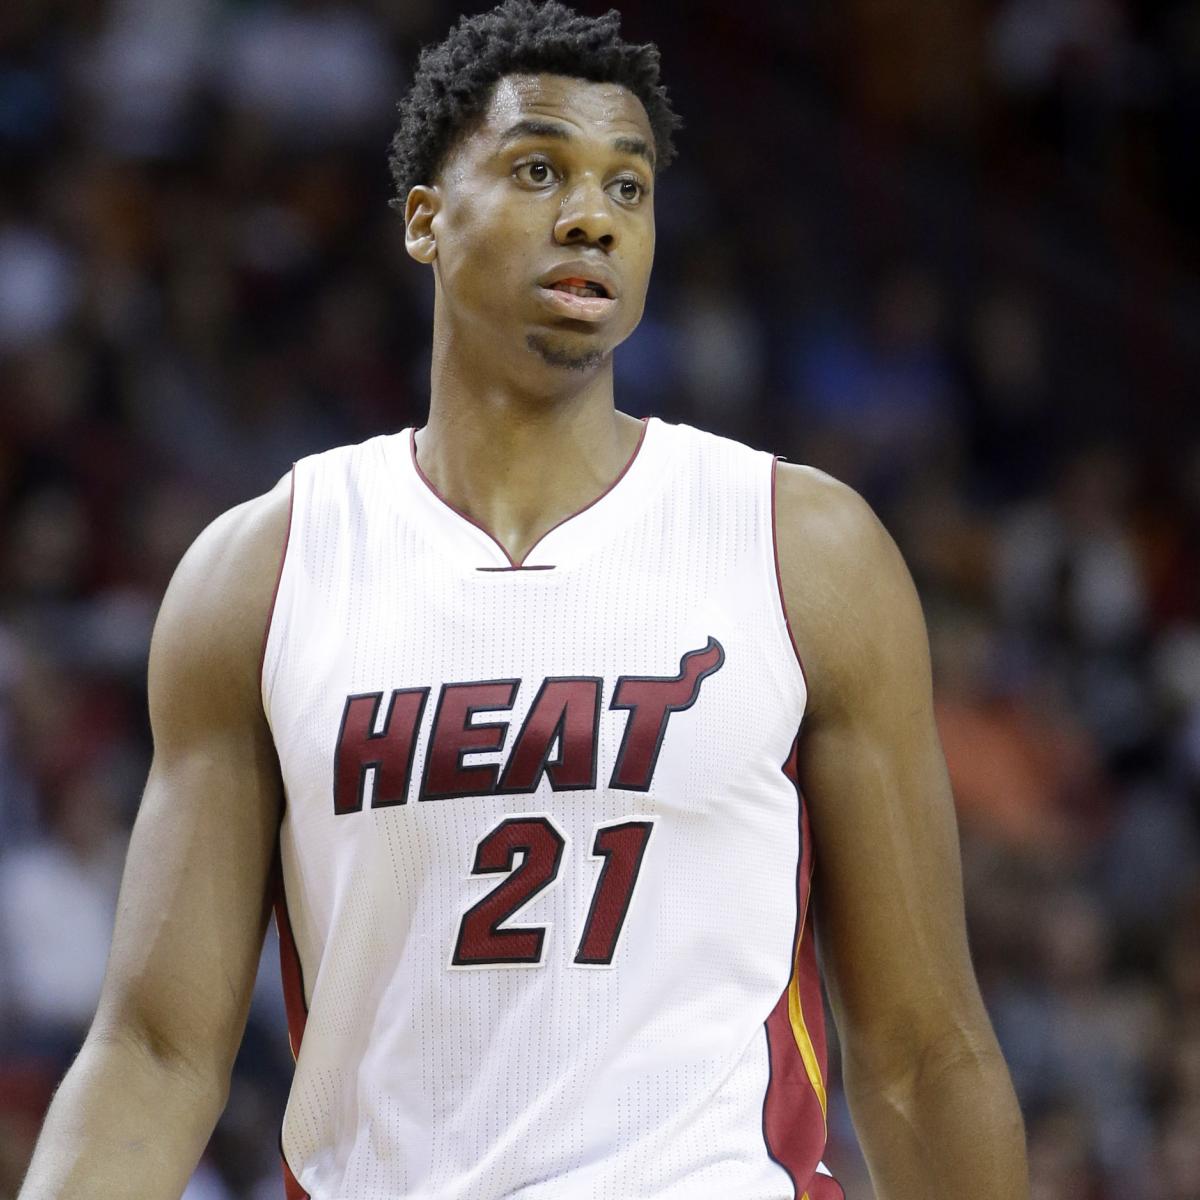 Hassan Whiteside Re-Signs with Heat: Latest Contract Details, Comments, Reaction